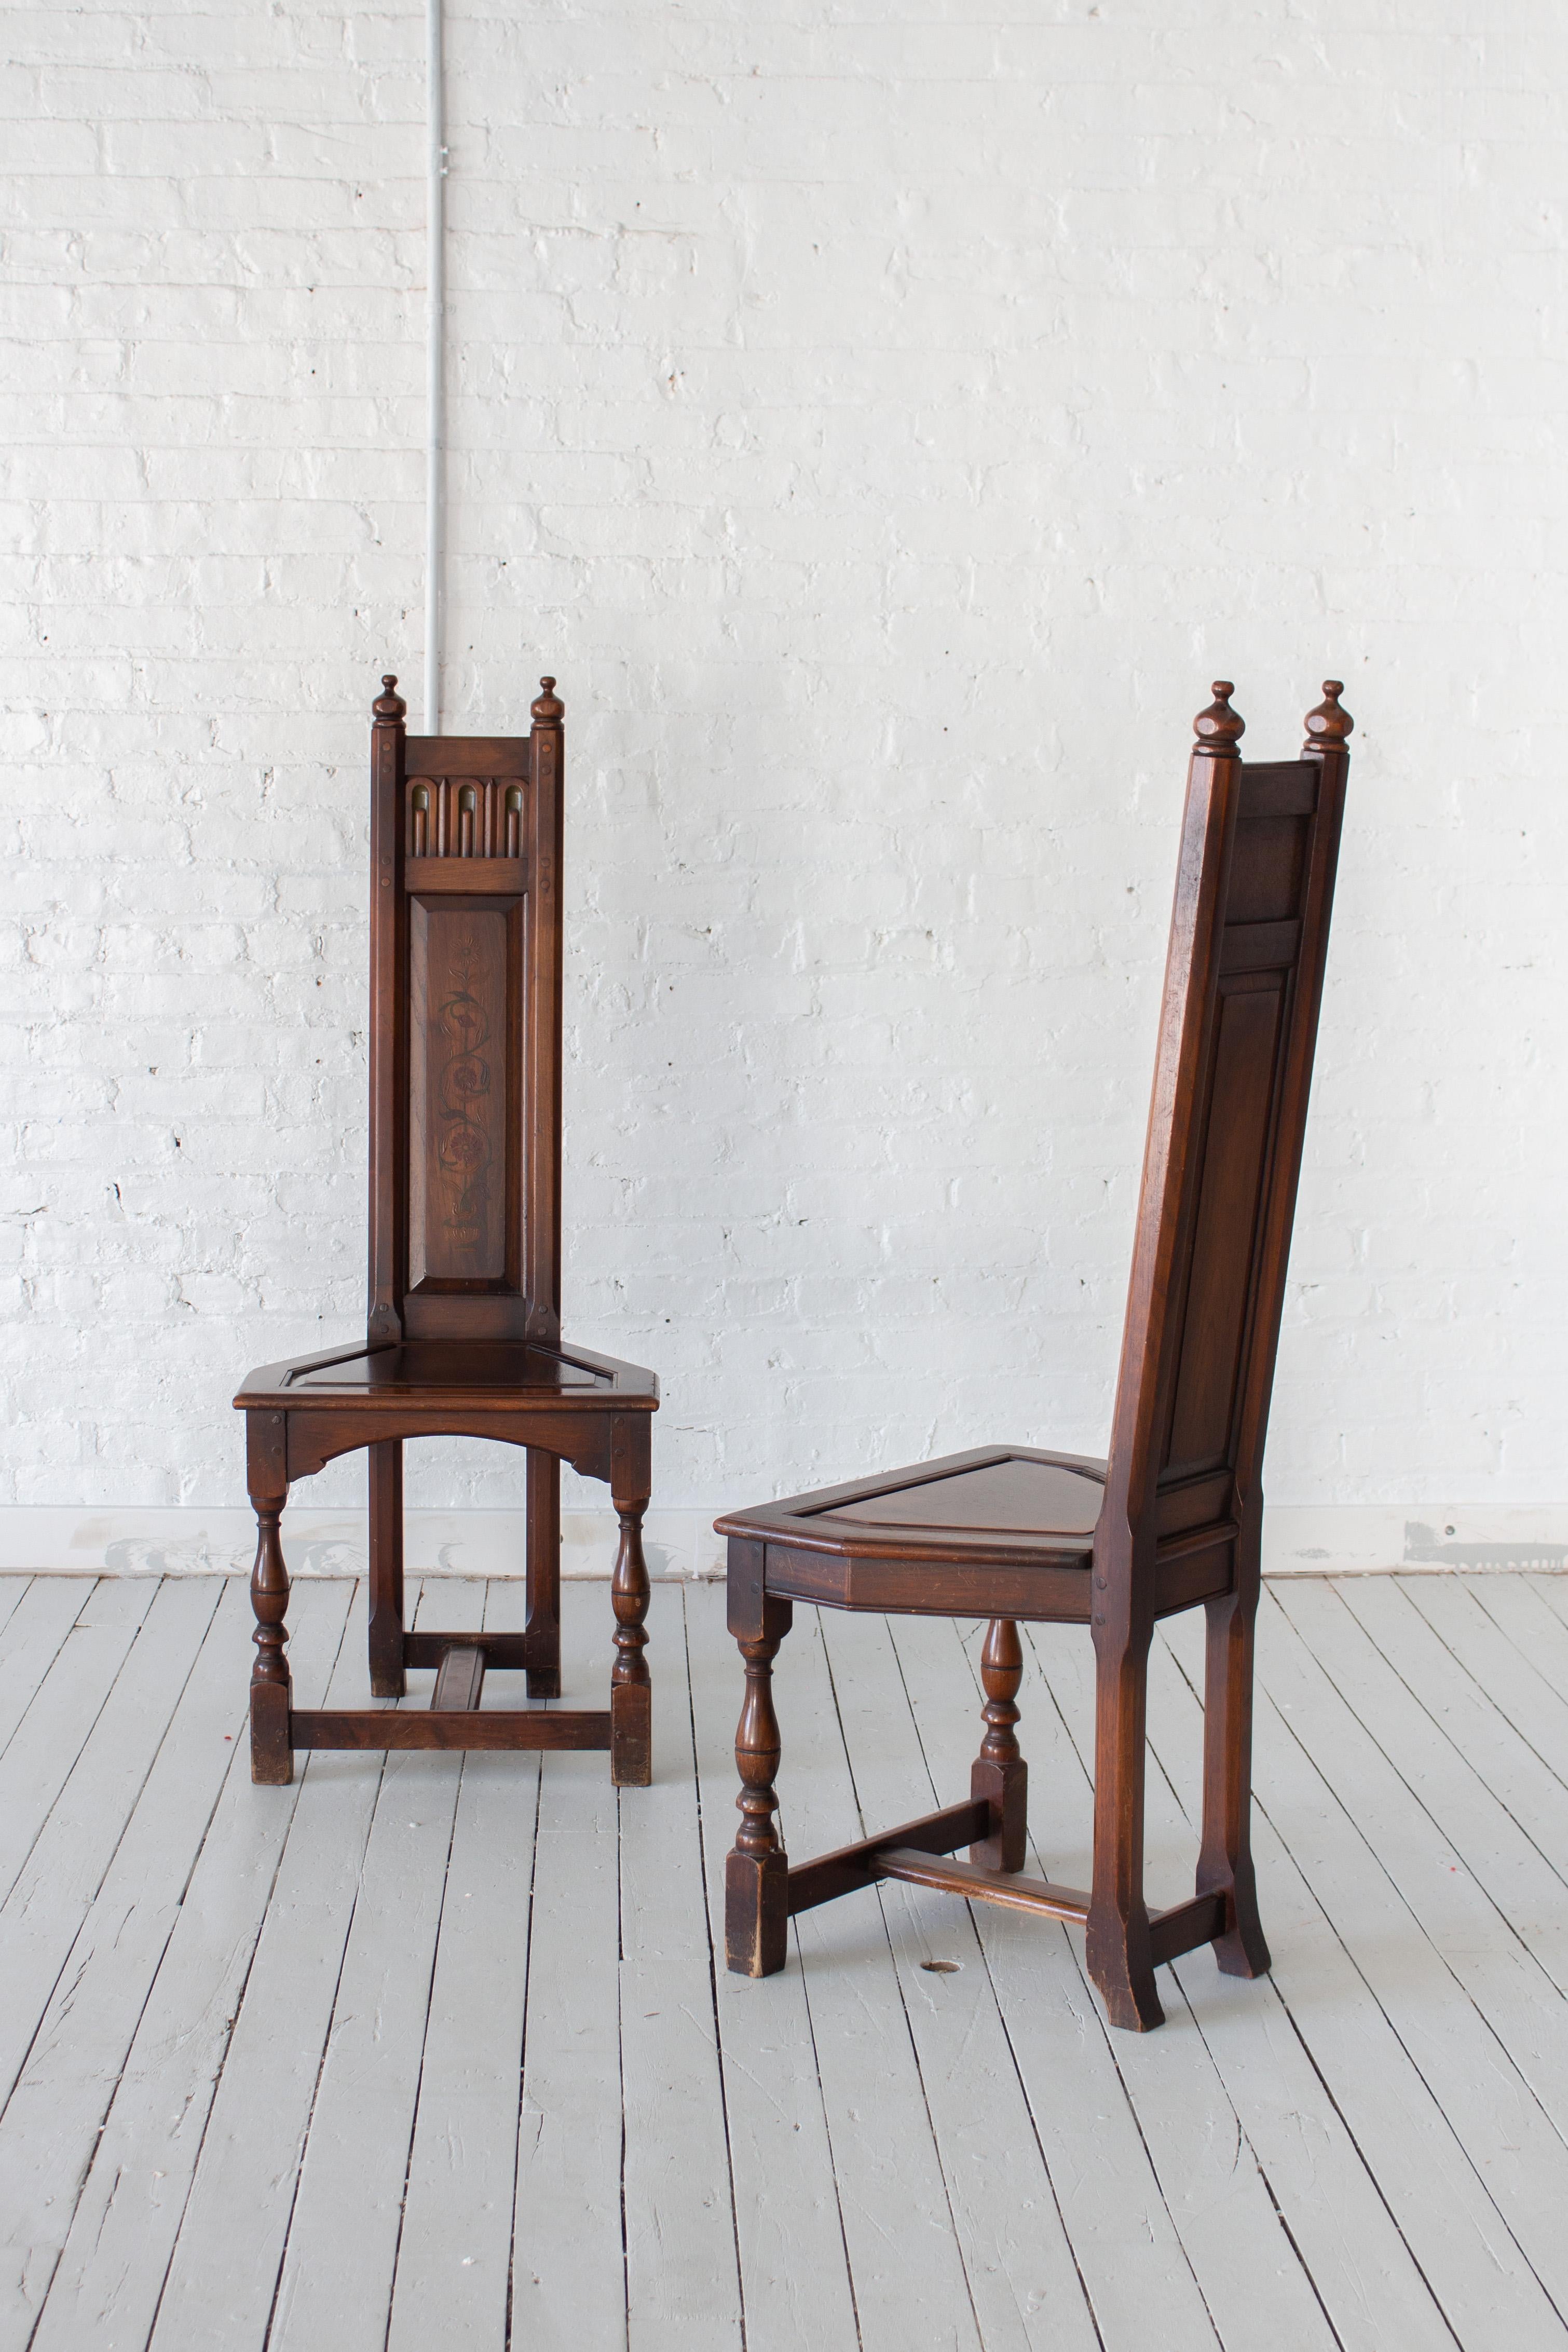 Pair of Gothic Revival Decorated Wooden Chairs by Kittinger In Good Condition For Sale In Brooklyn, NY